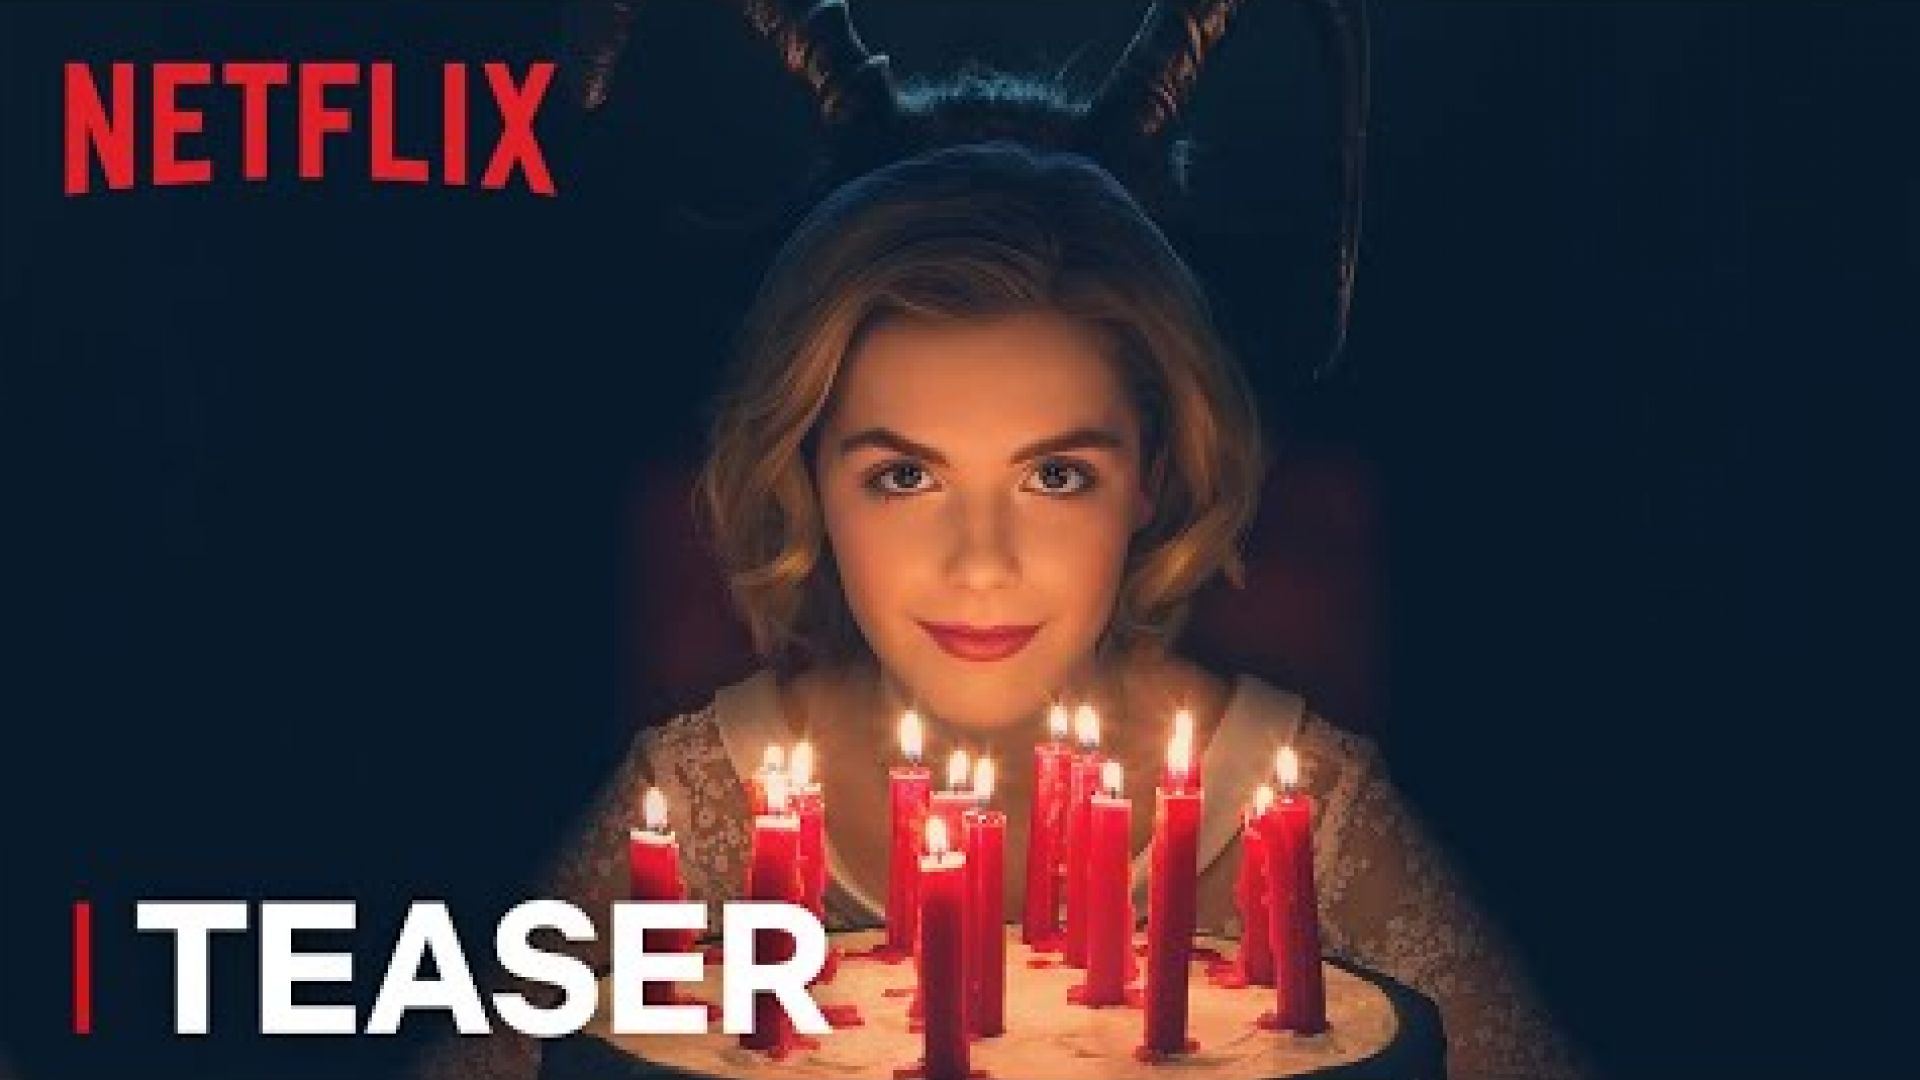 &#039;The Chilling Adventures of Sabrina&#039; Teaser